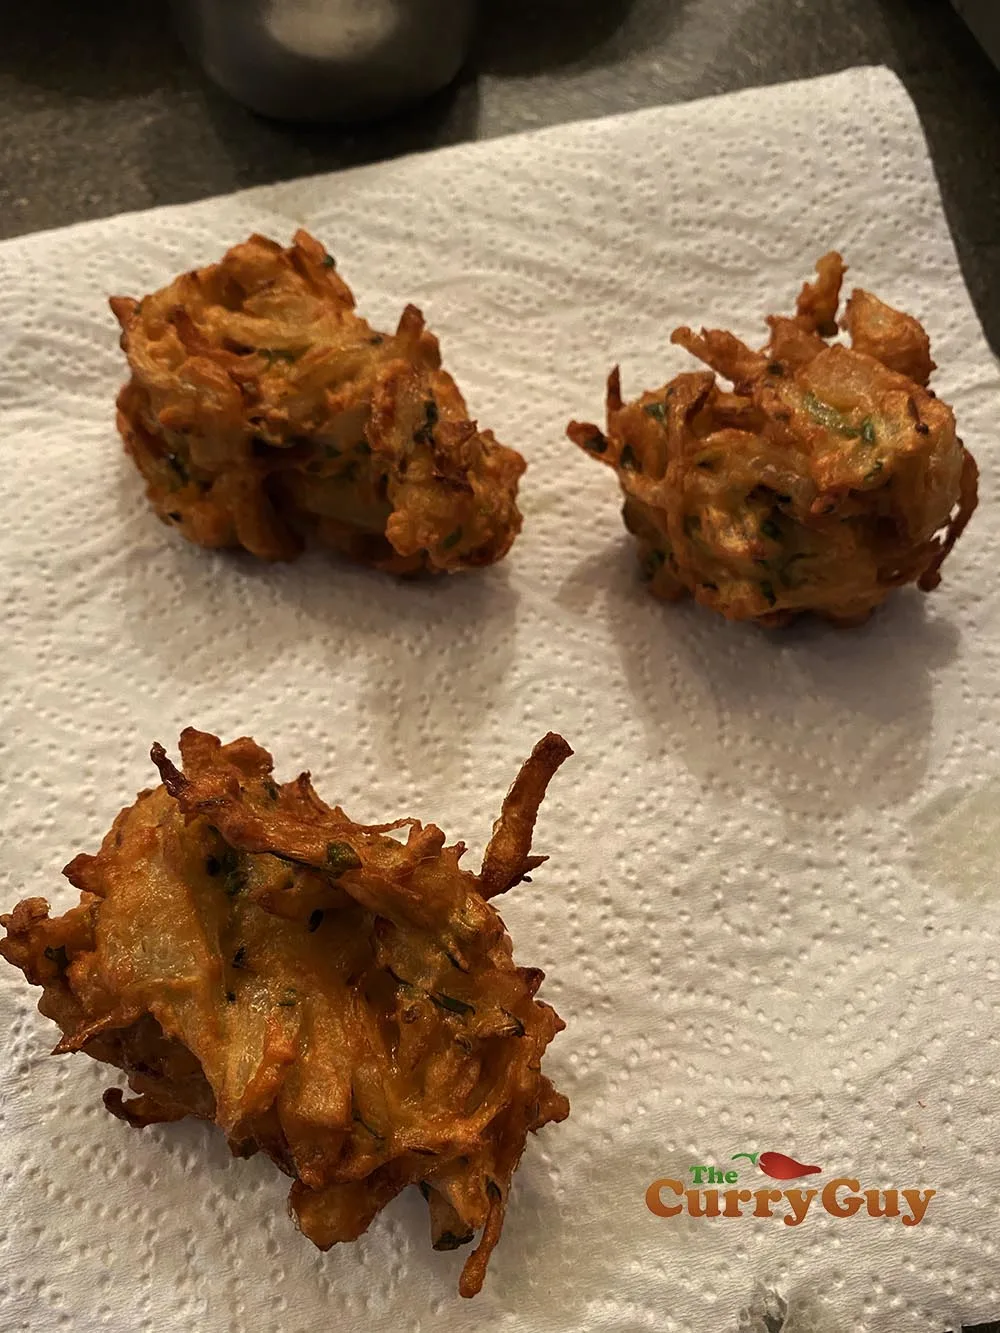 Onion bhajis after first cook